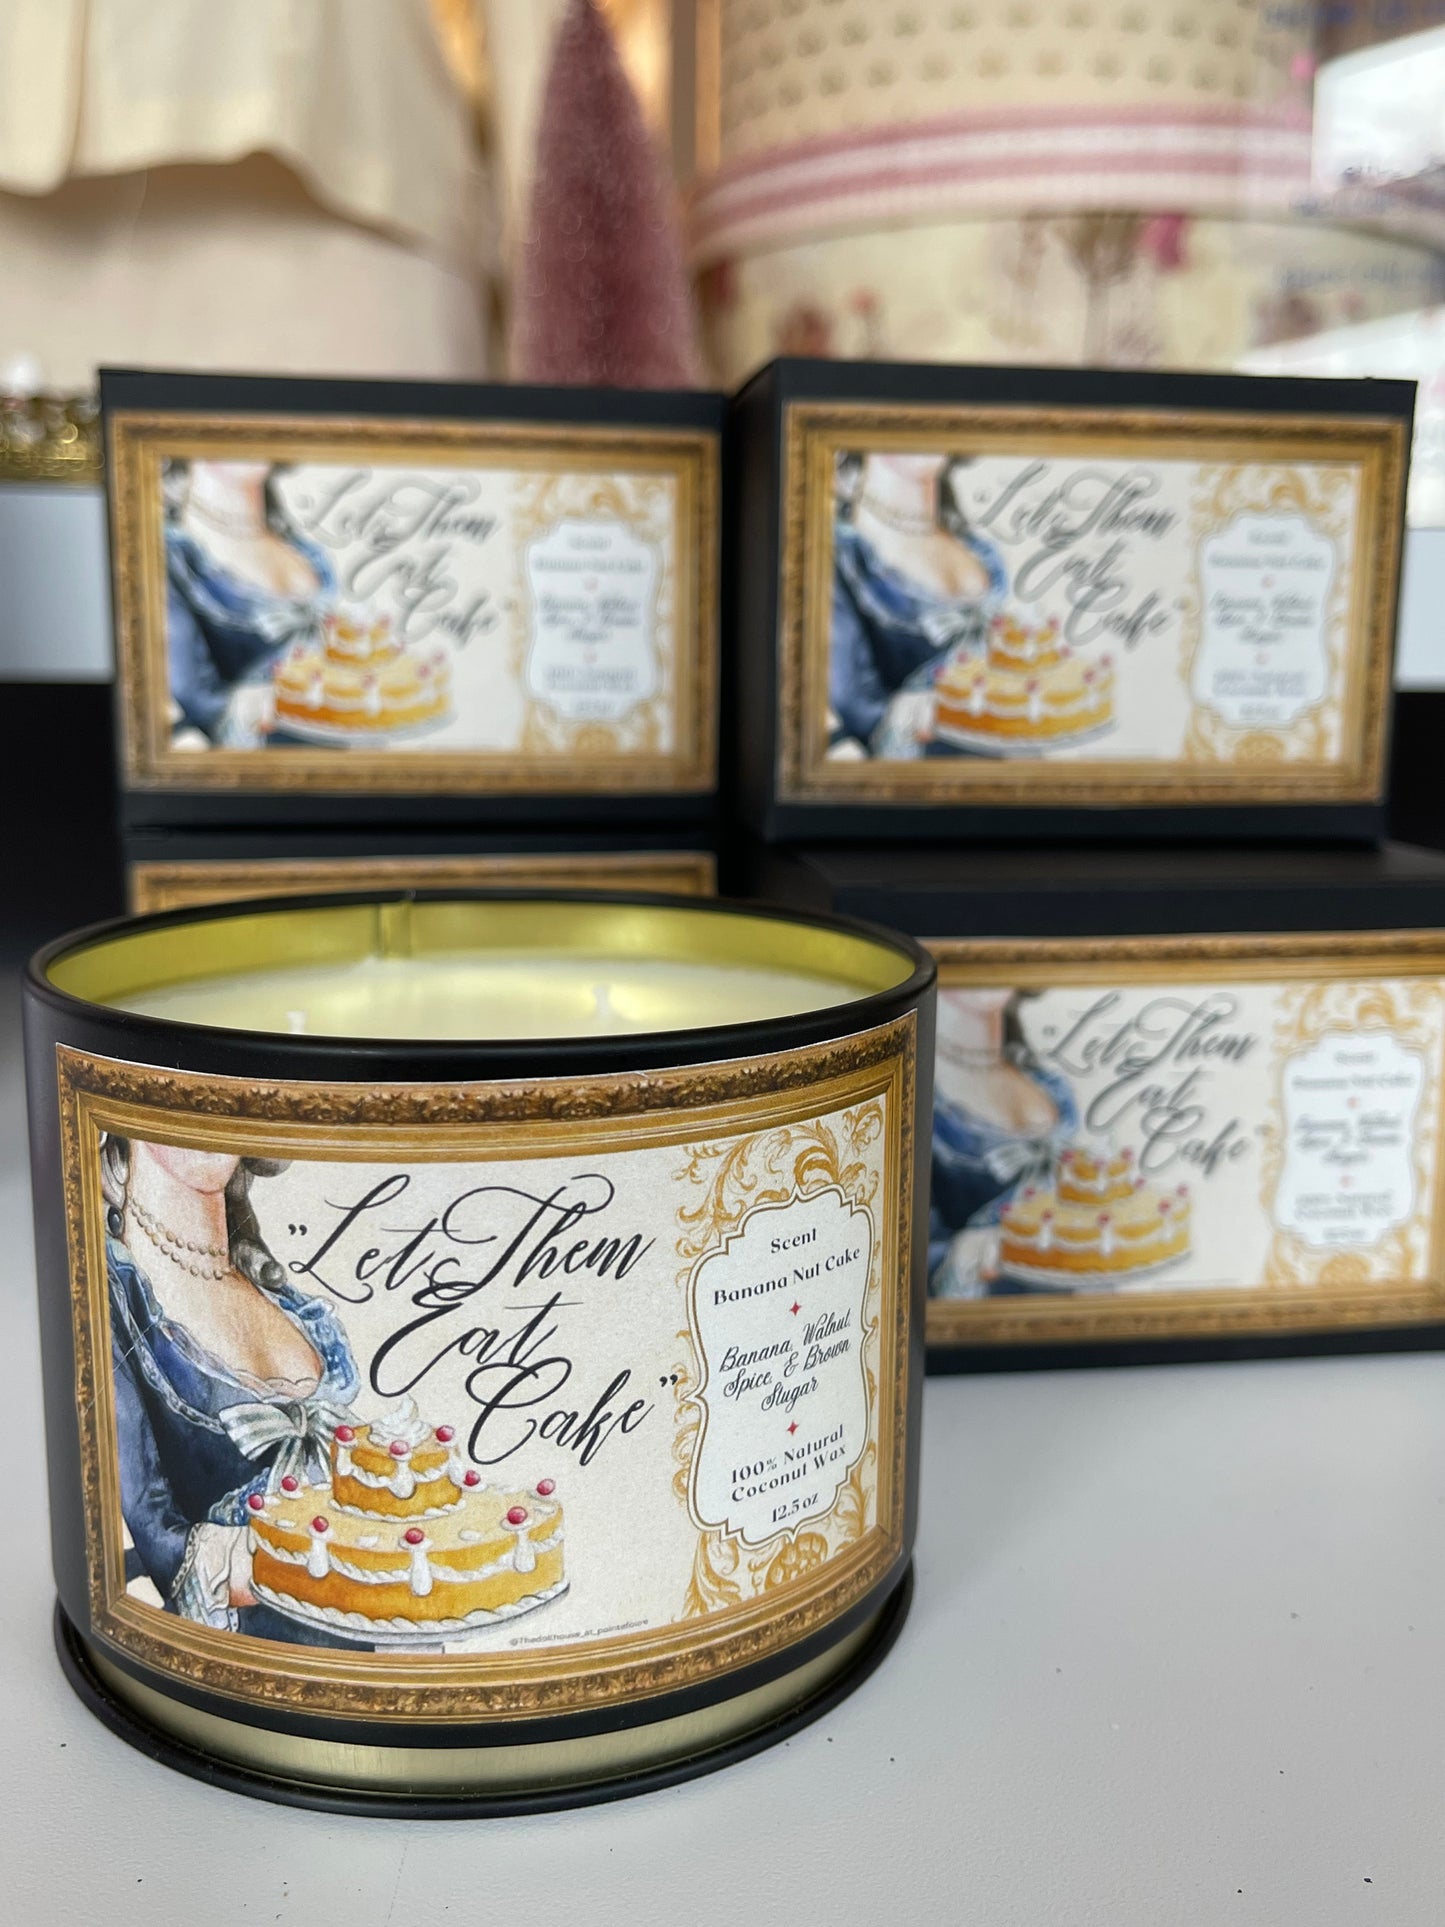 "Let Them Eat Cake" Candle